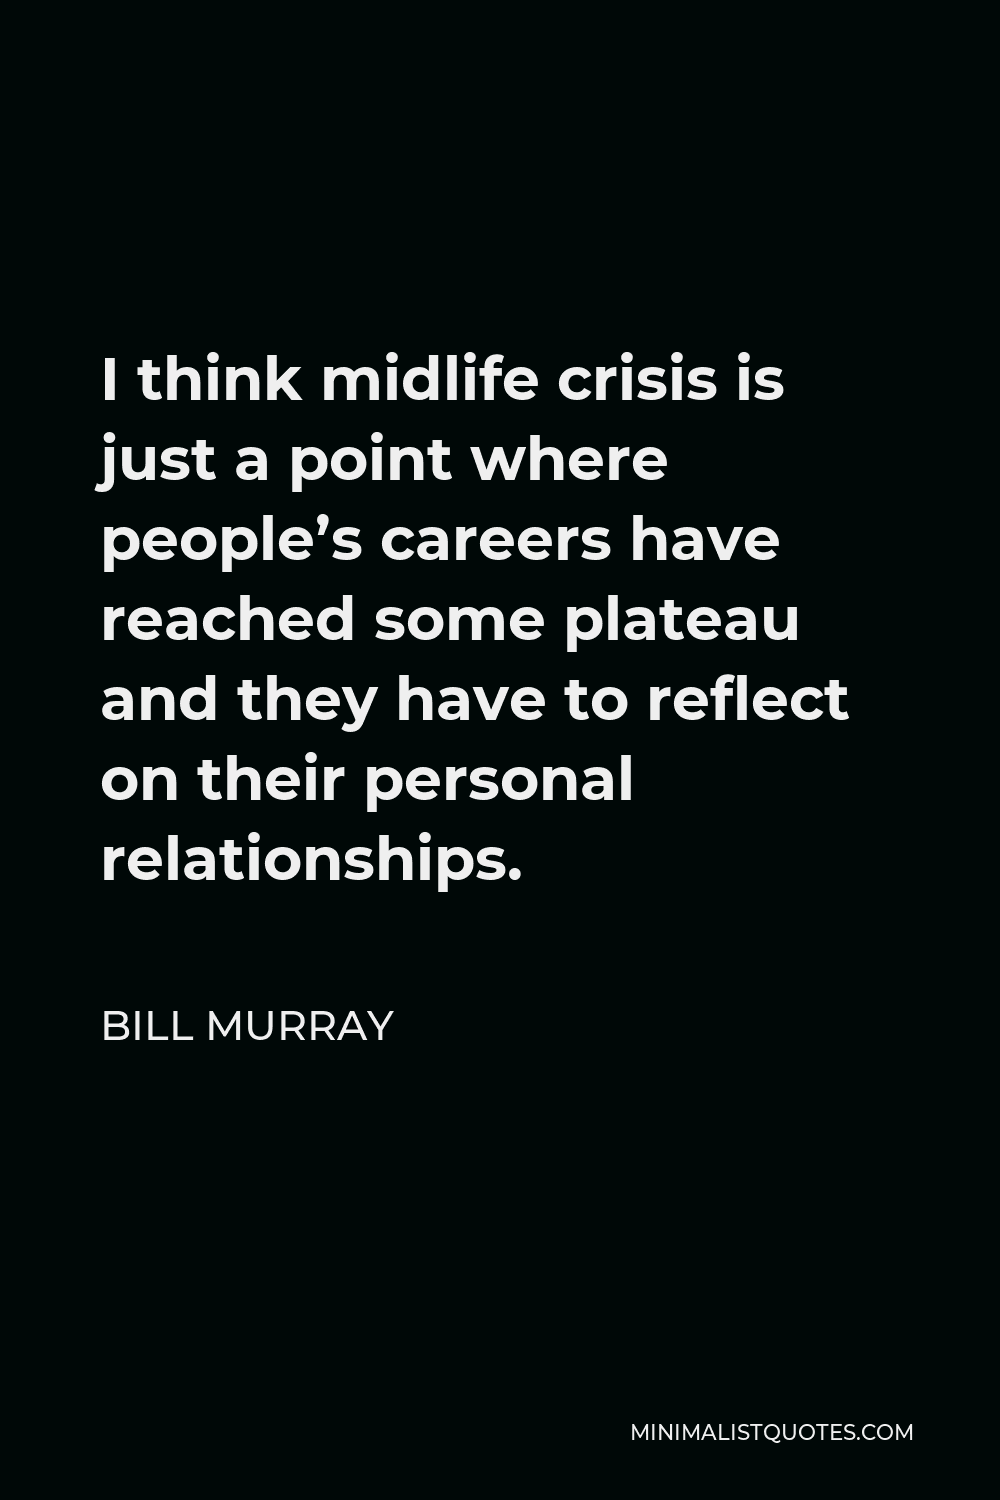 Bill Murray Quote - I think midlife crisis is just a point where people’s careers have reached some plateau and they have to reflect on their personal relationships.